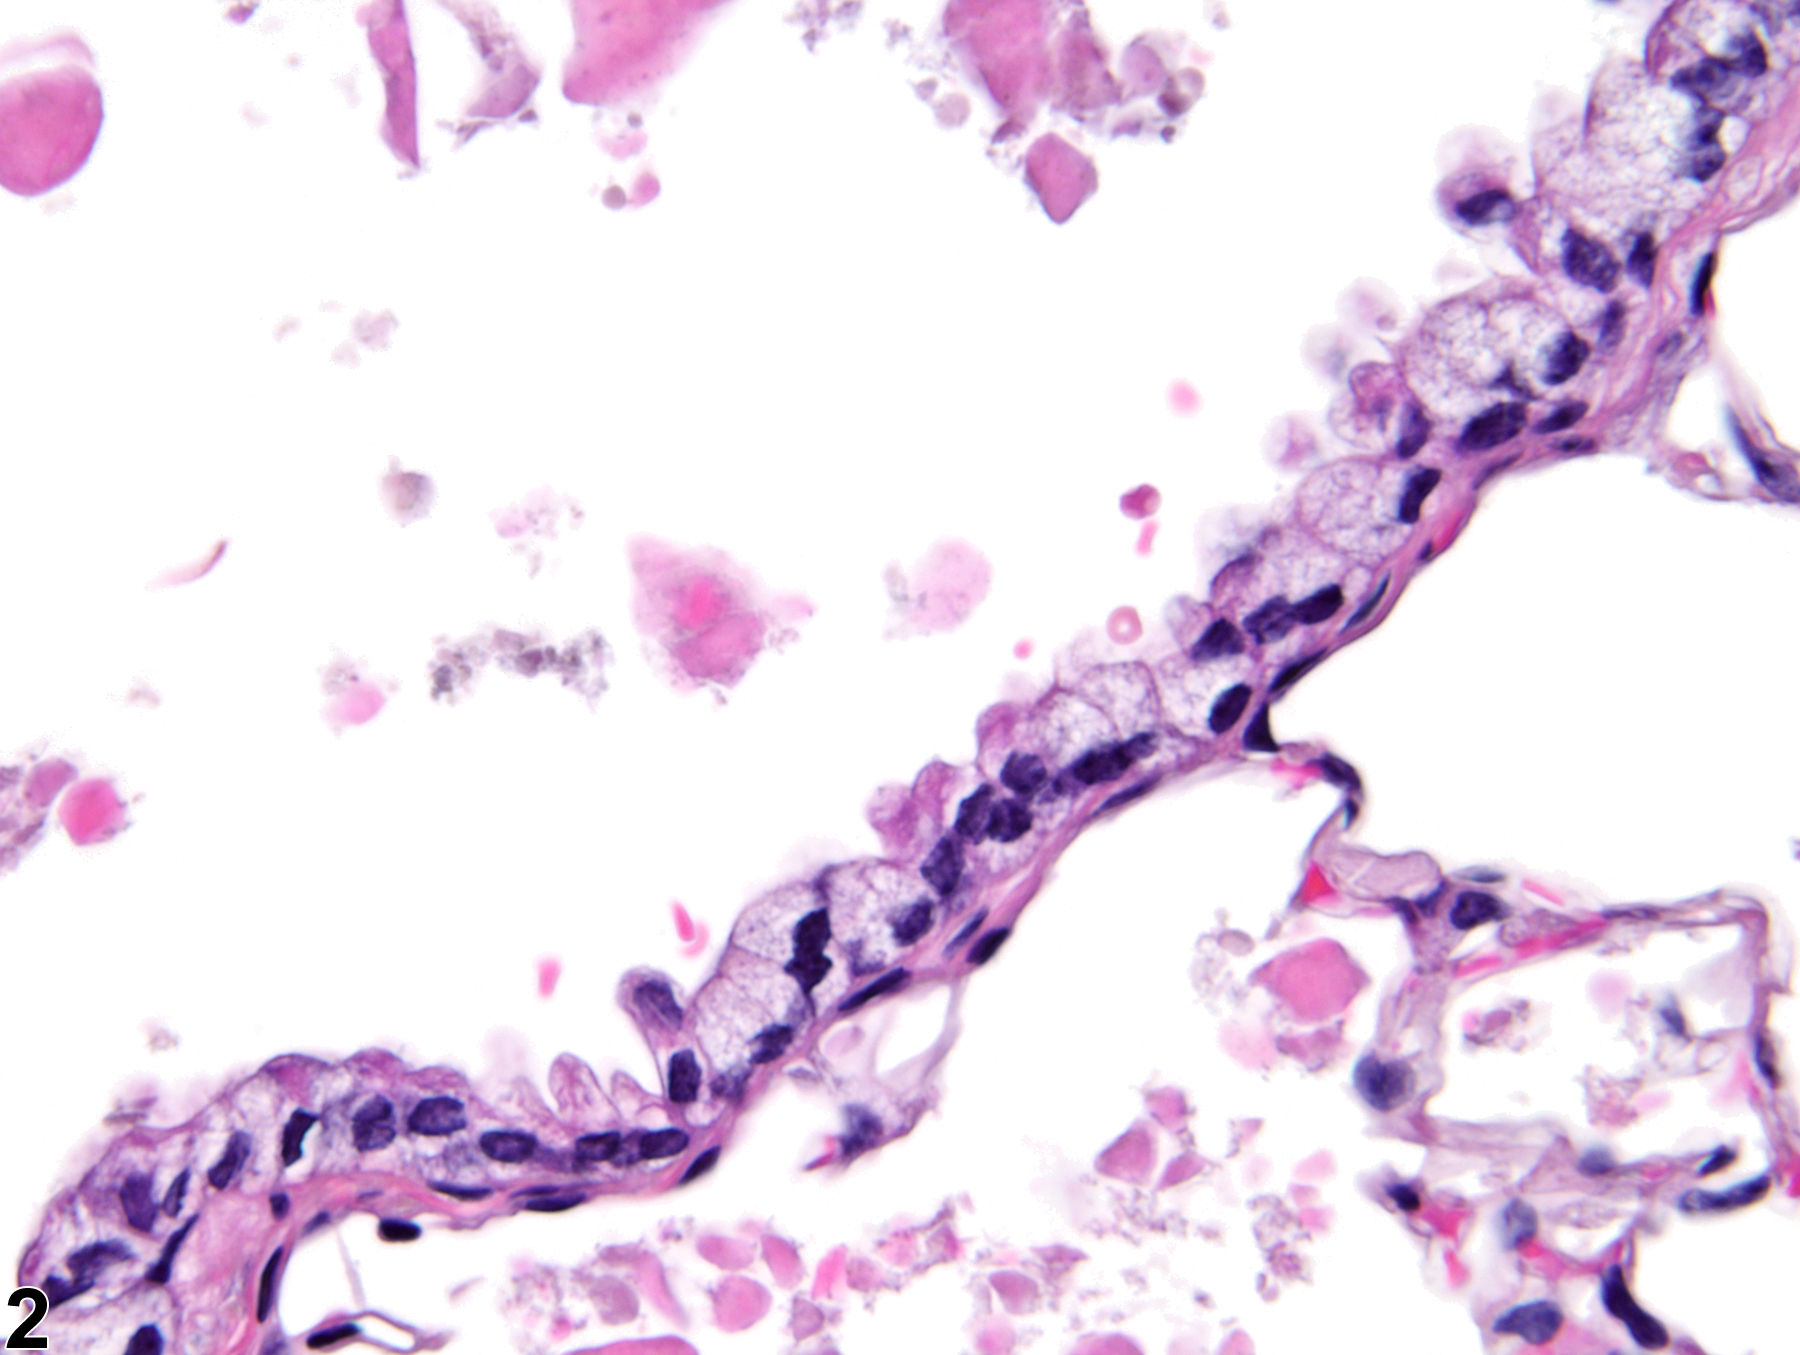 Image of bronchiolar vacuolization, cytoplasmic in the lung from a female B6C3F1/N mouse in a chronic study